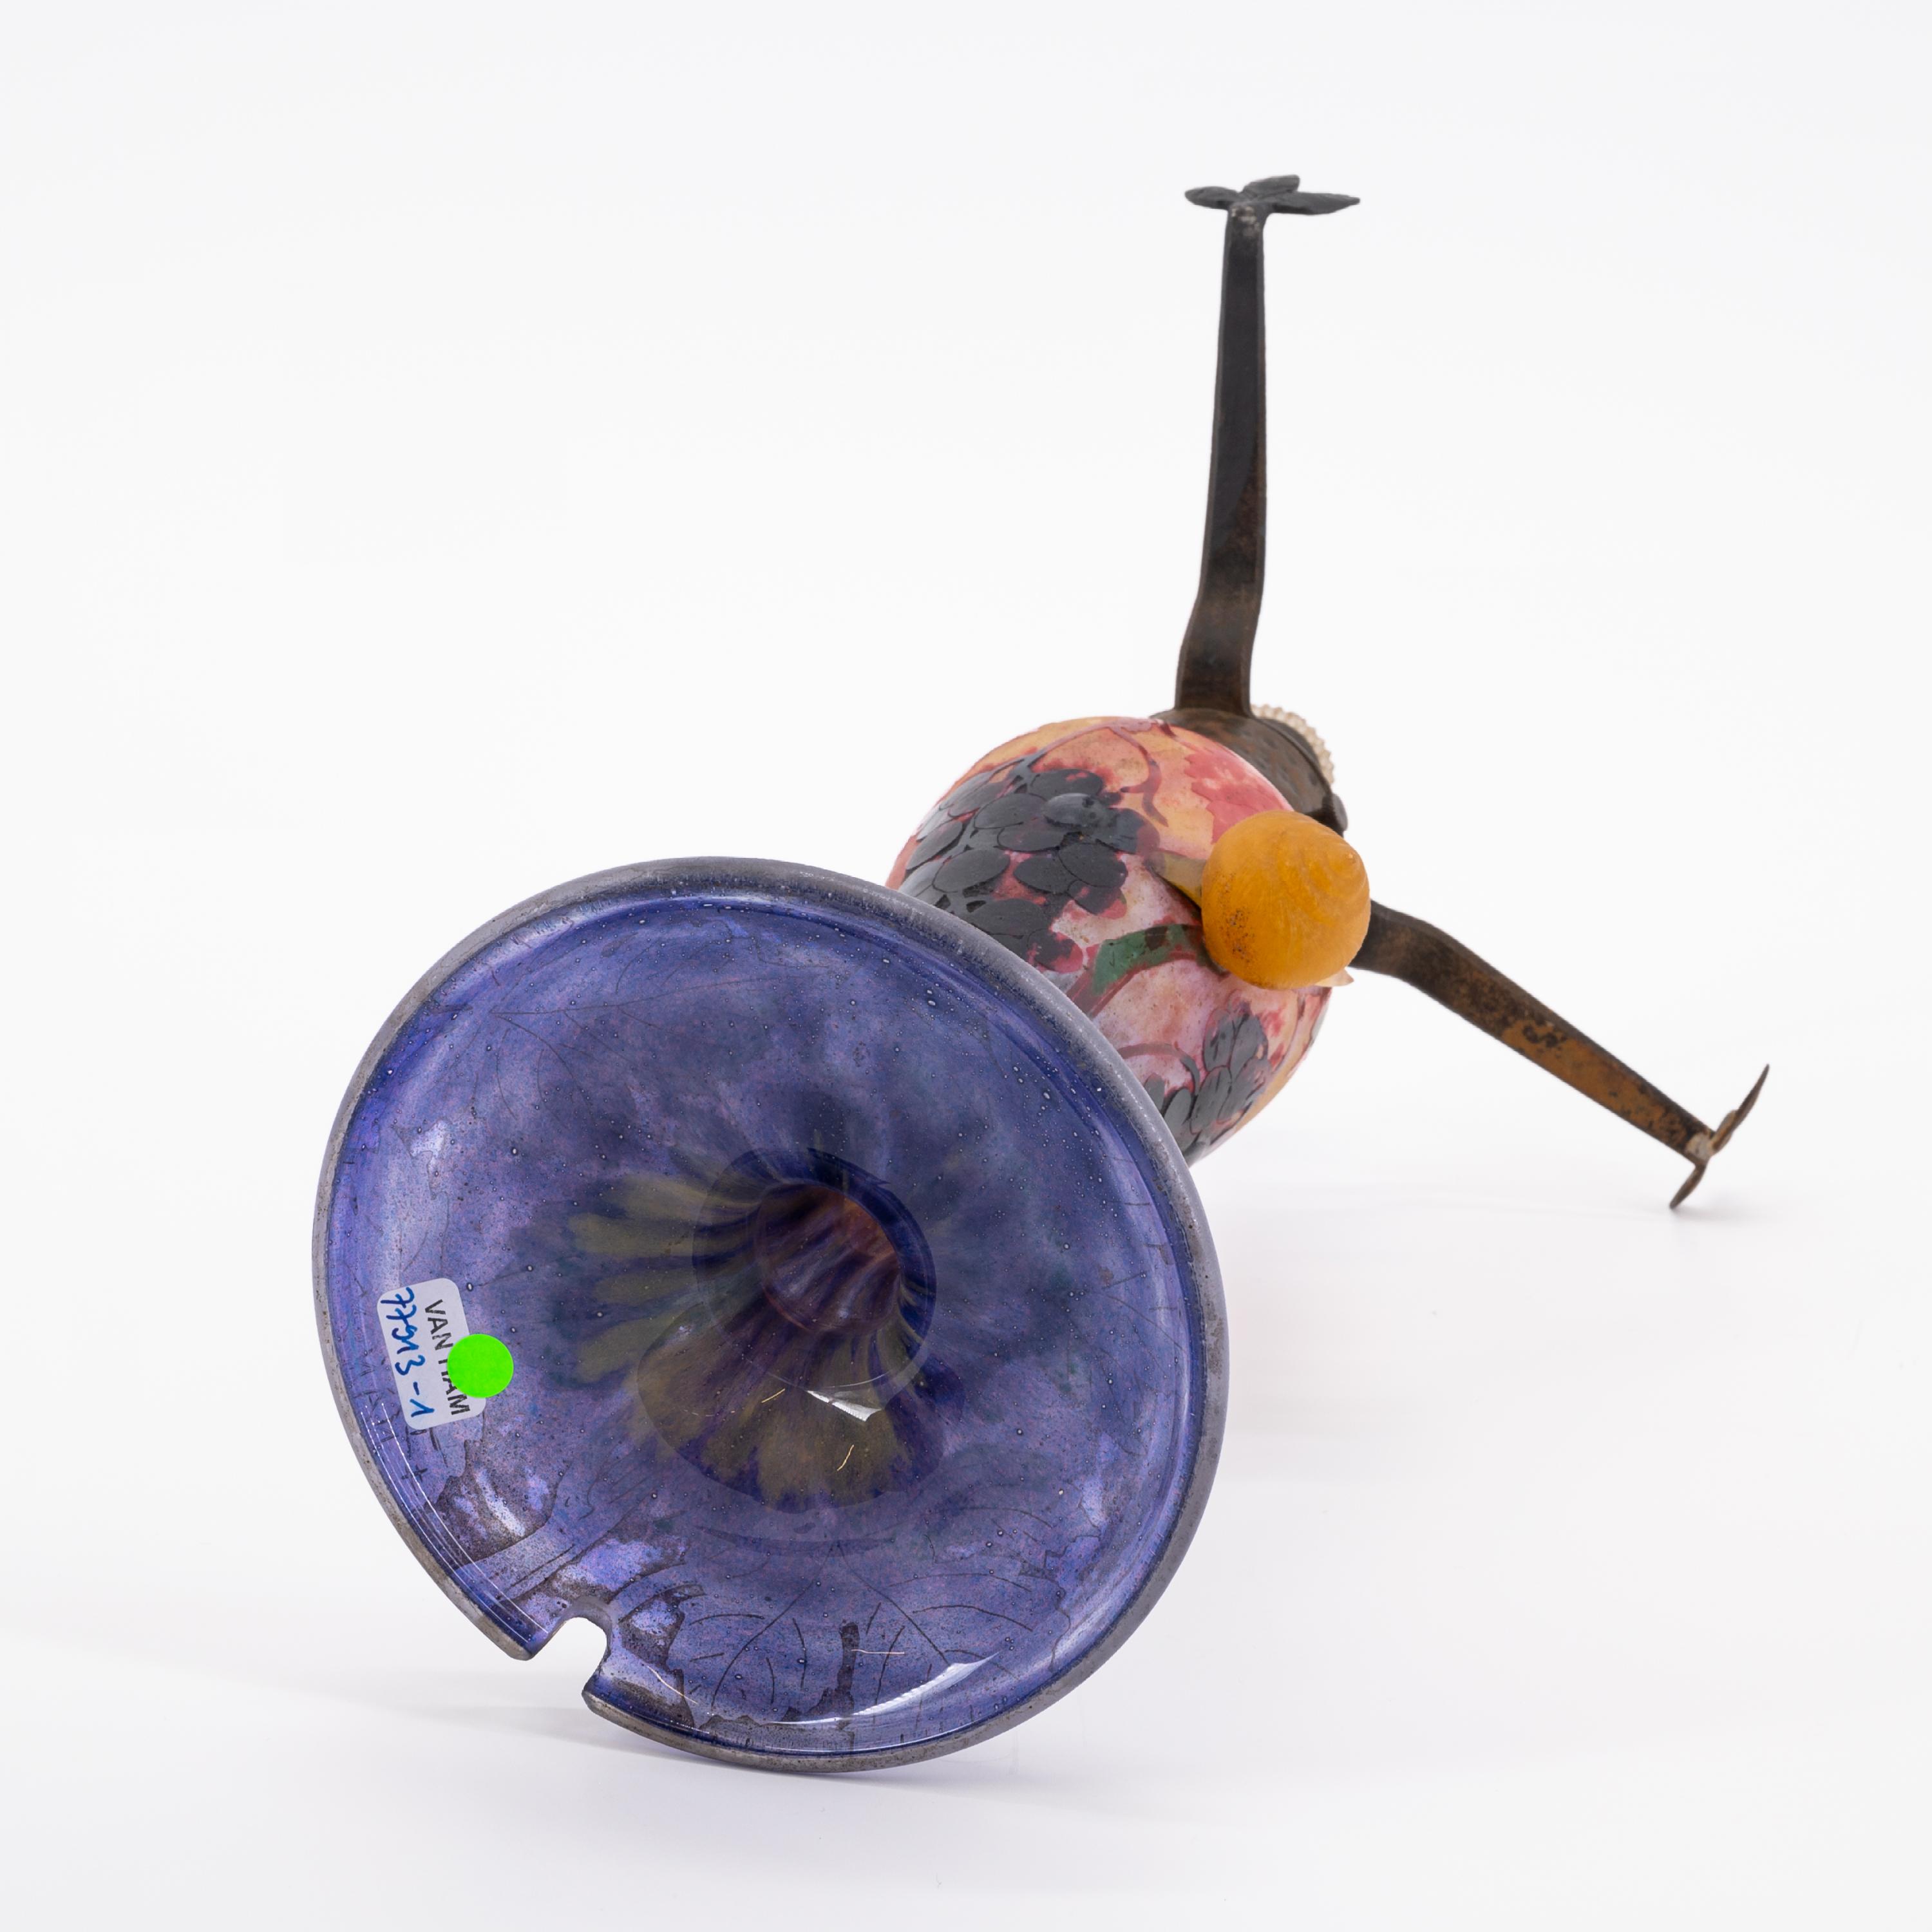 RARE GLASS TABLE LAMP 'VIGNE ET ESCARGOTS' WITH A SNAIL - Image 7 of 10